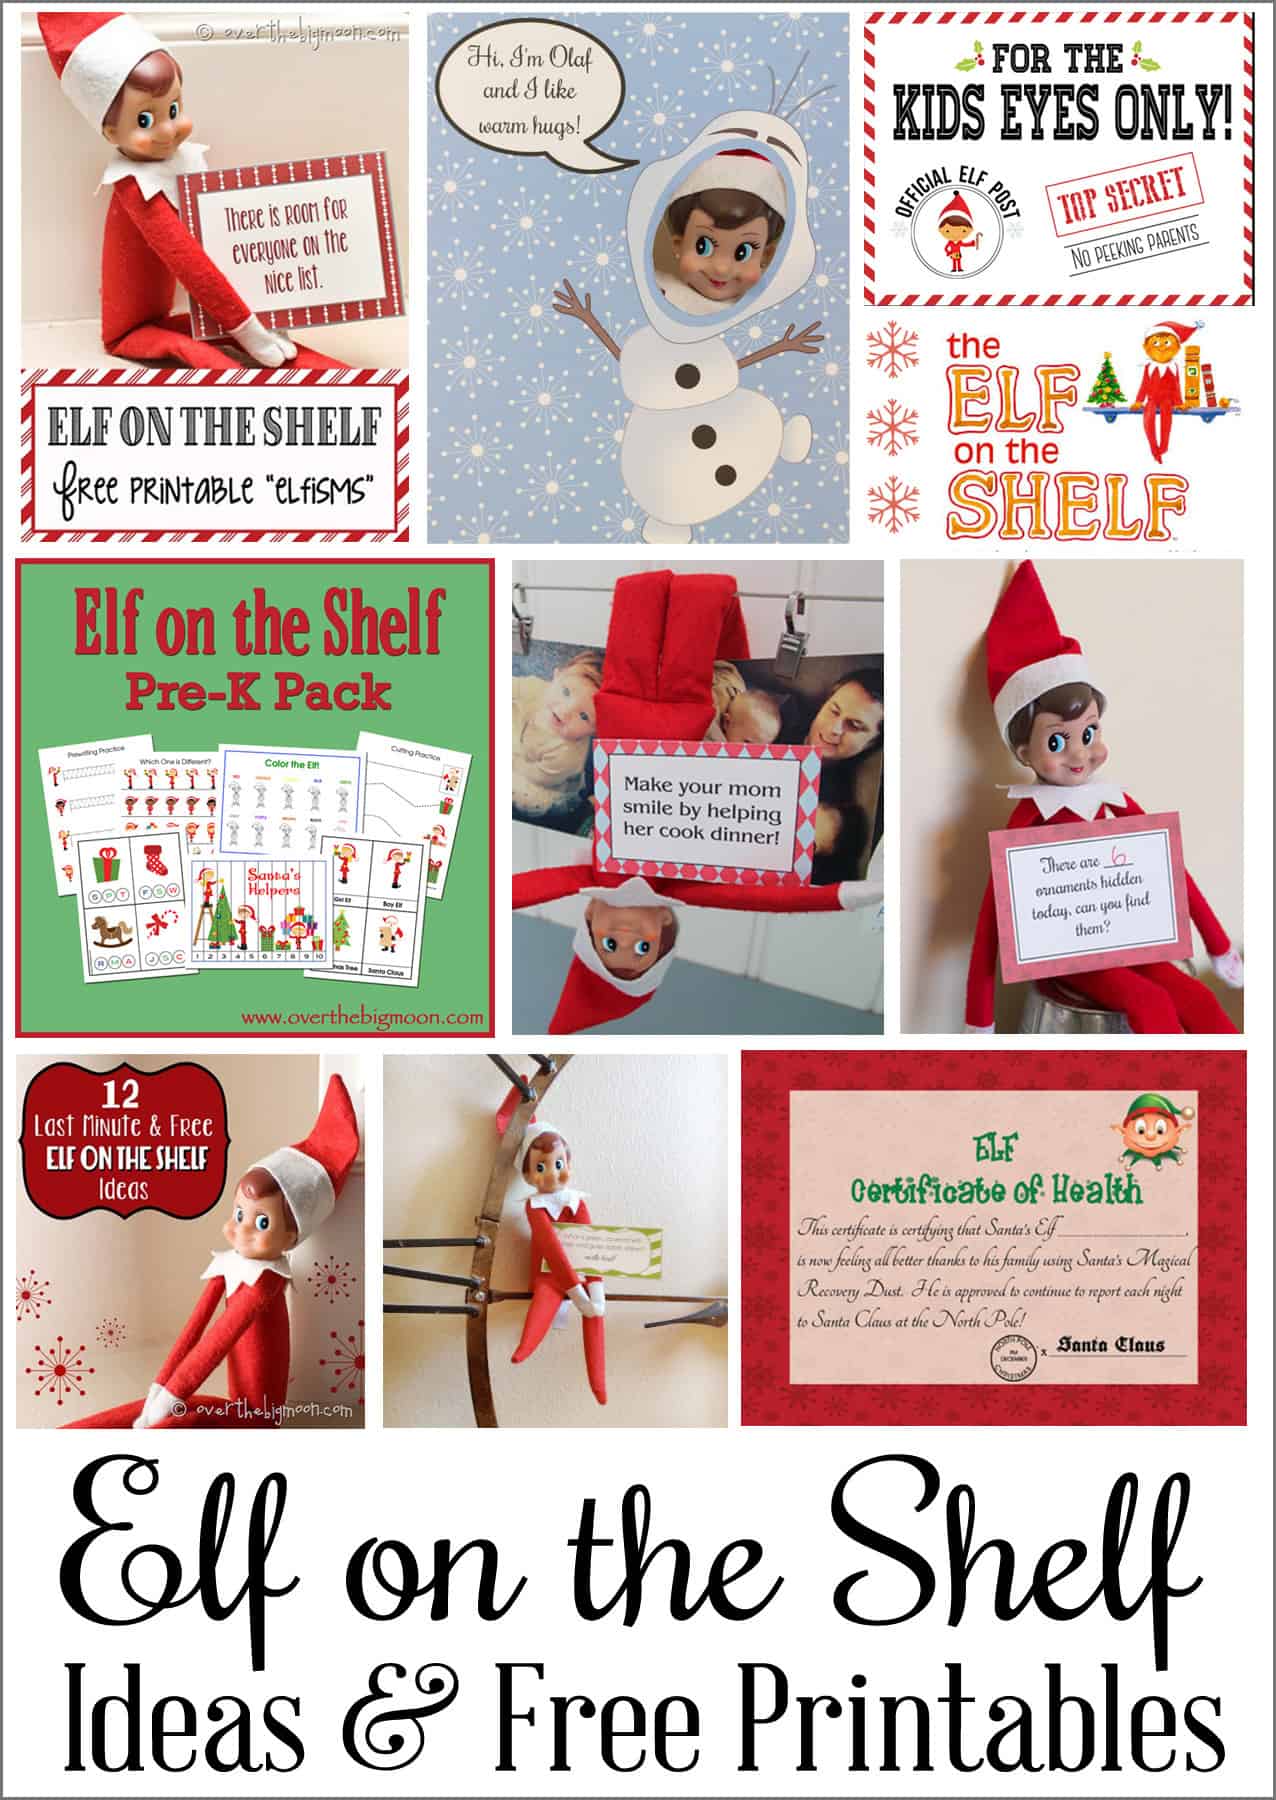 search-results-for-elf-on-the-shelf-recovery-kit-calendar-2015